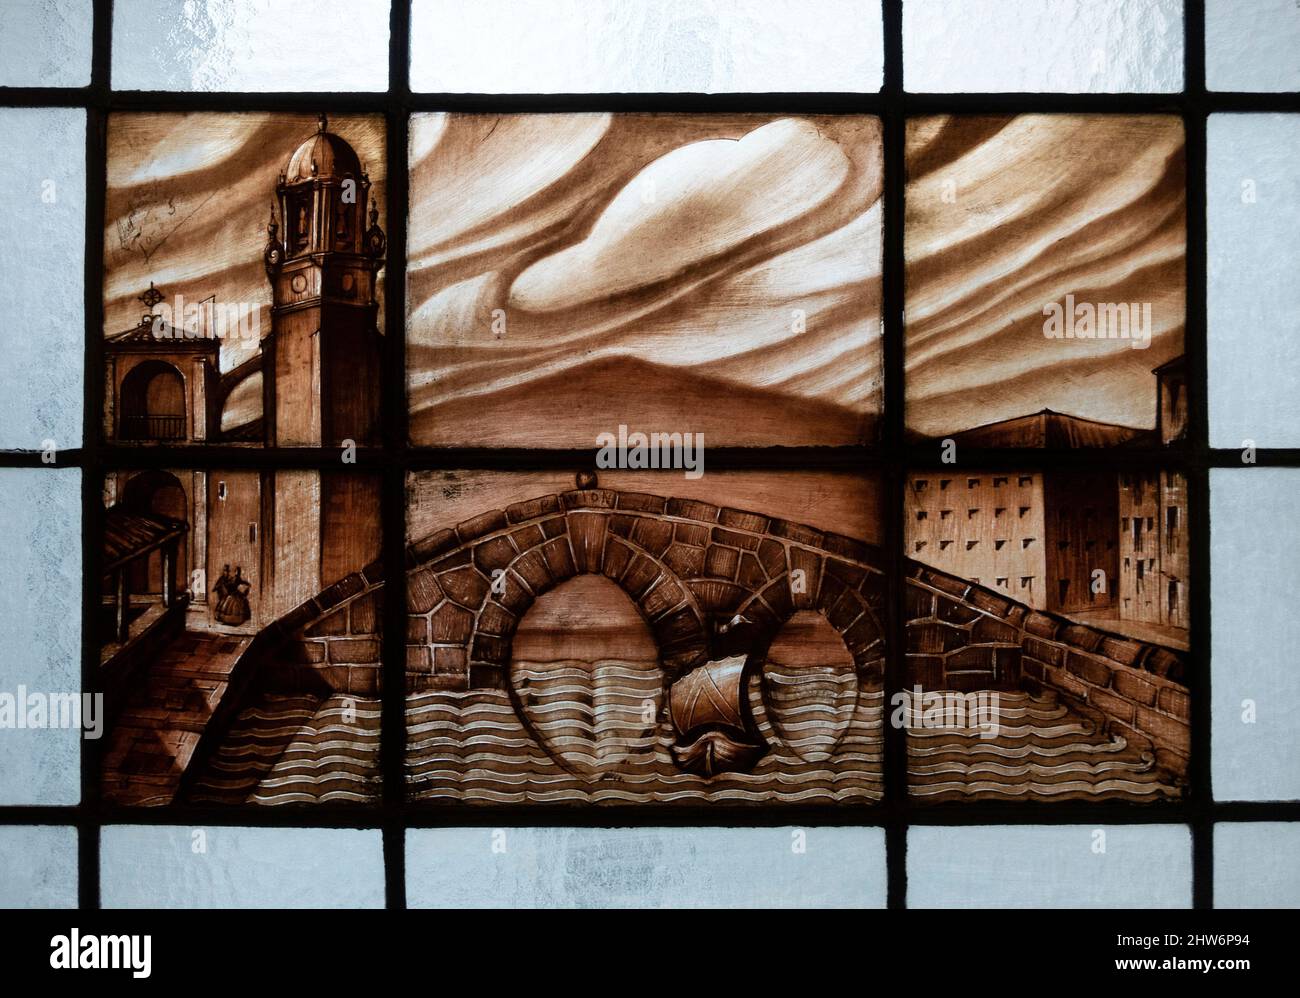 Old stained glass window pictures of the industrial docks that were once in Bilbao in the Basque Country, Spain Stock Photo